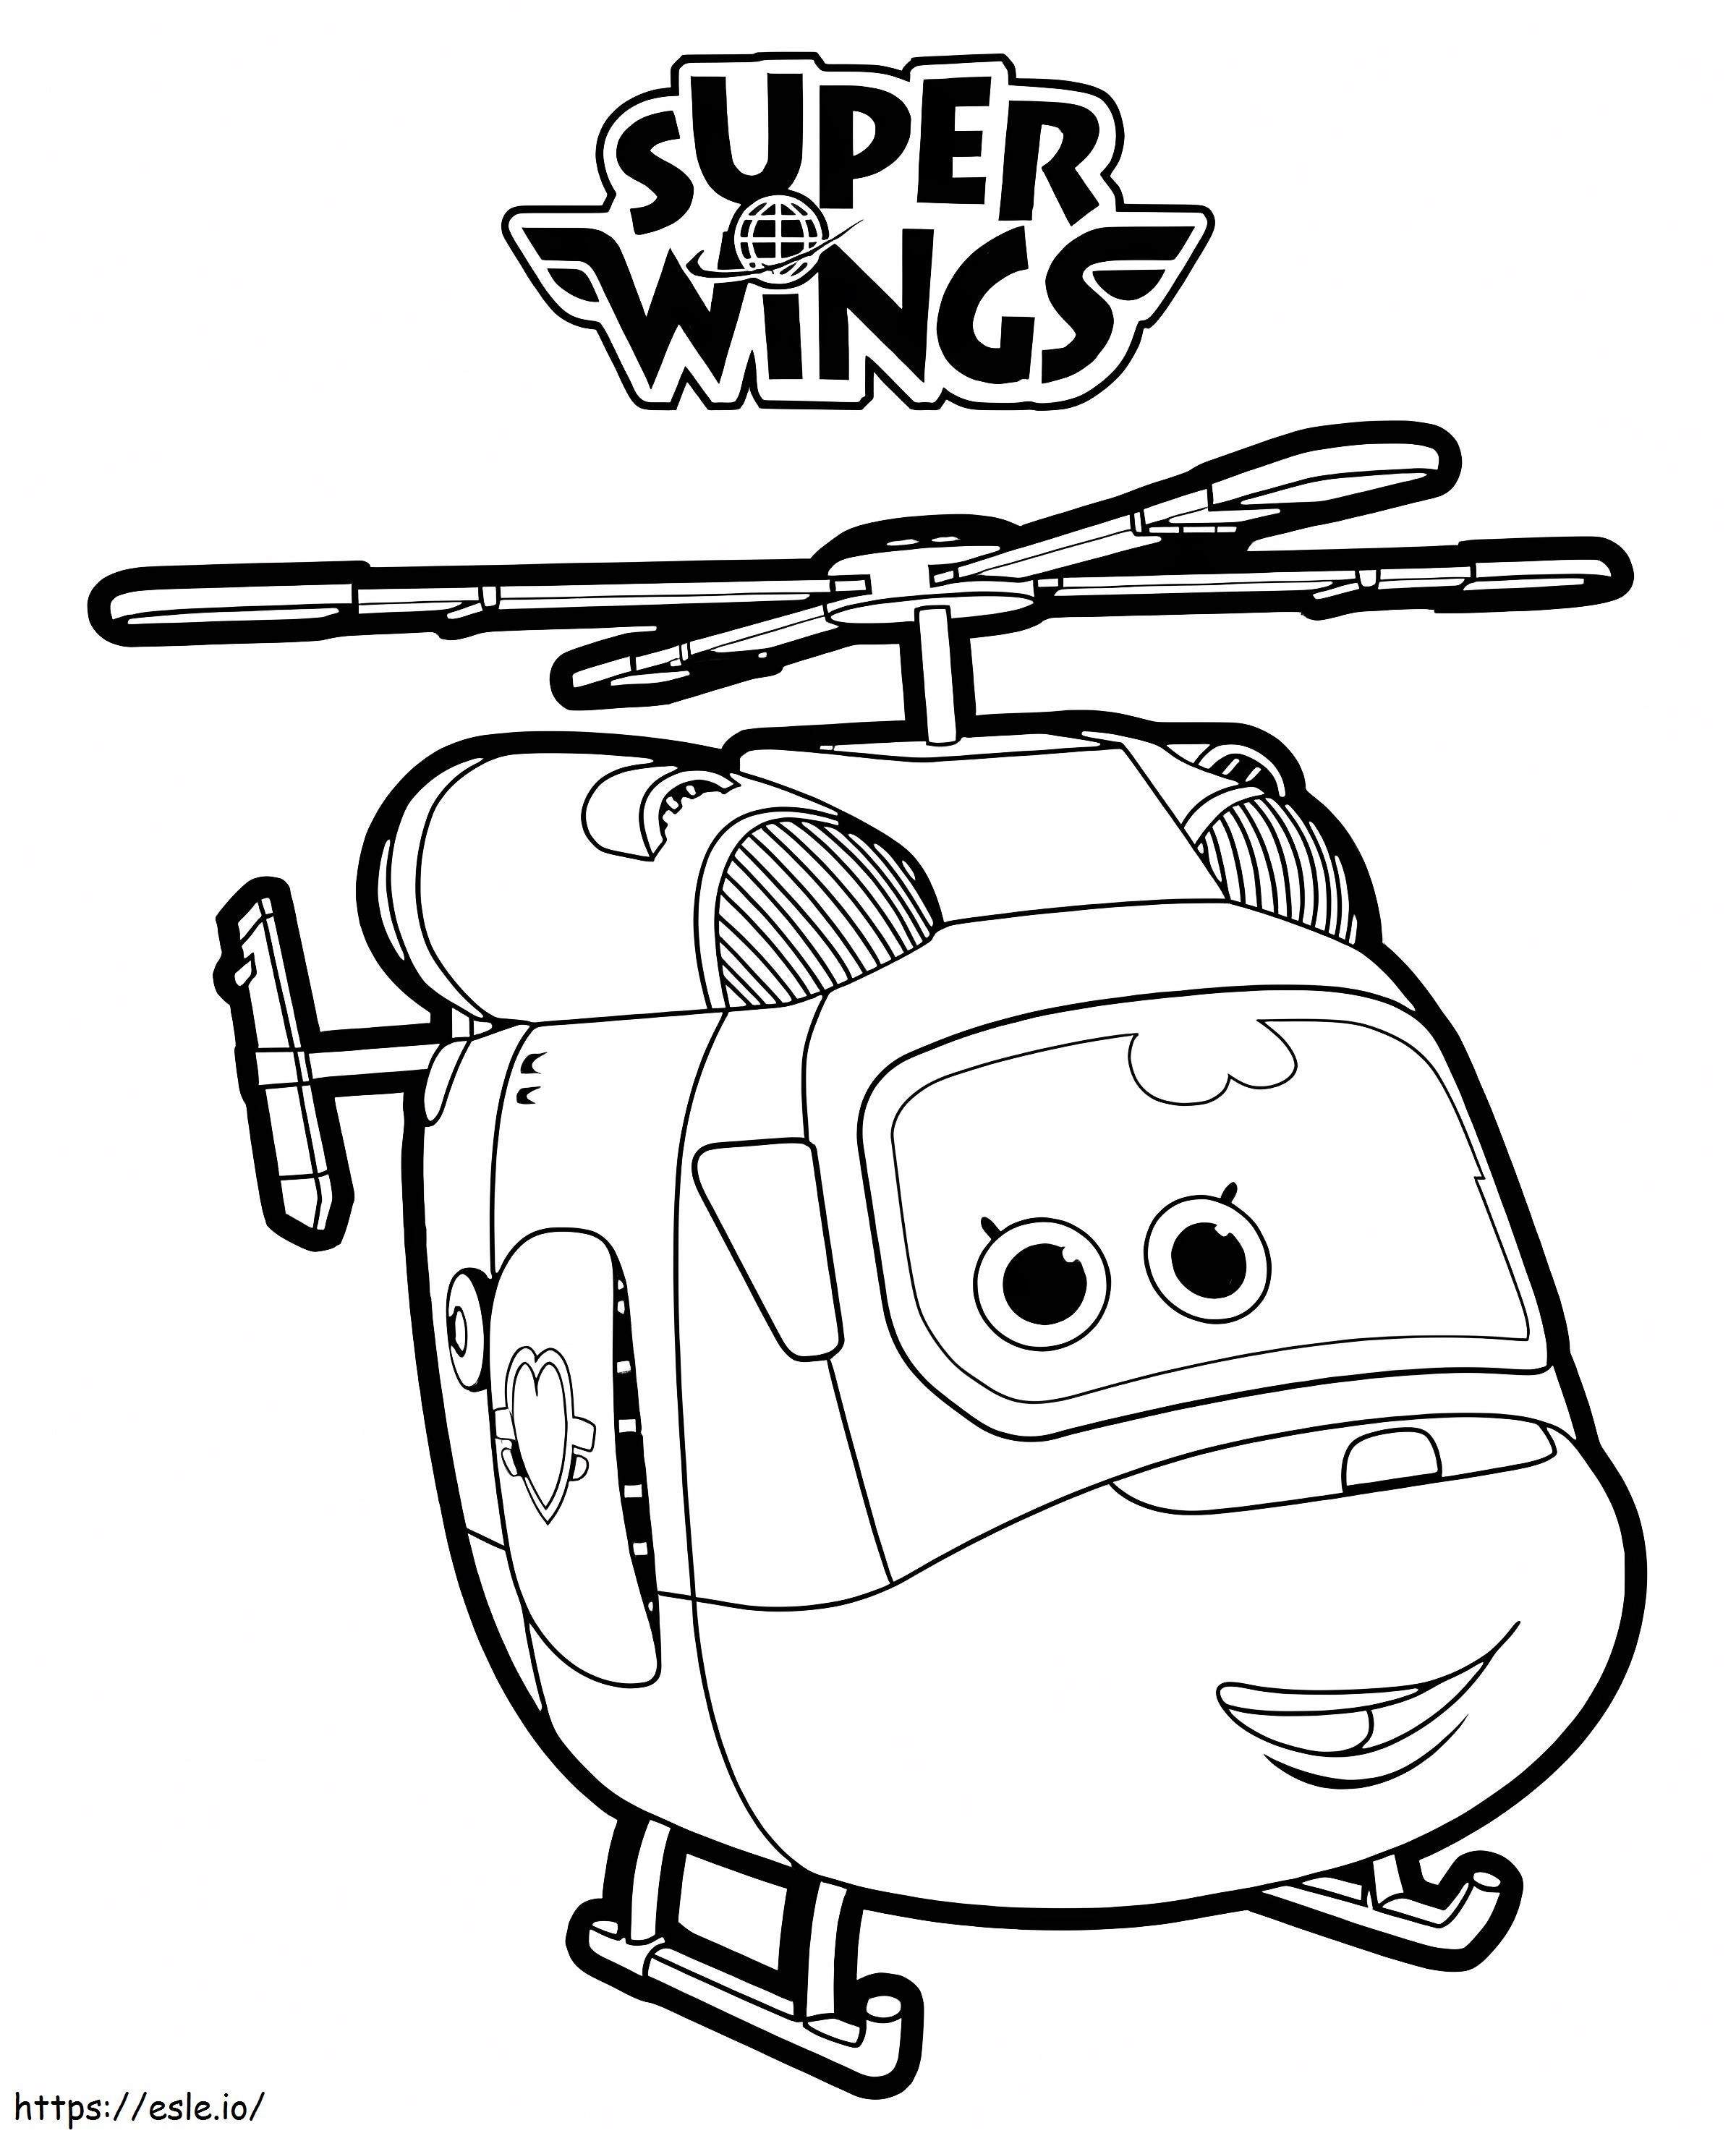 Dizzy Super Wings Smiling coloring page